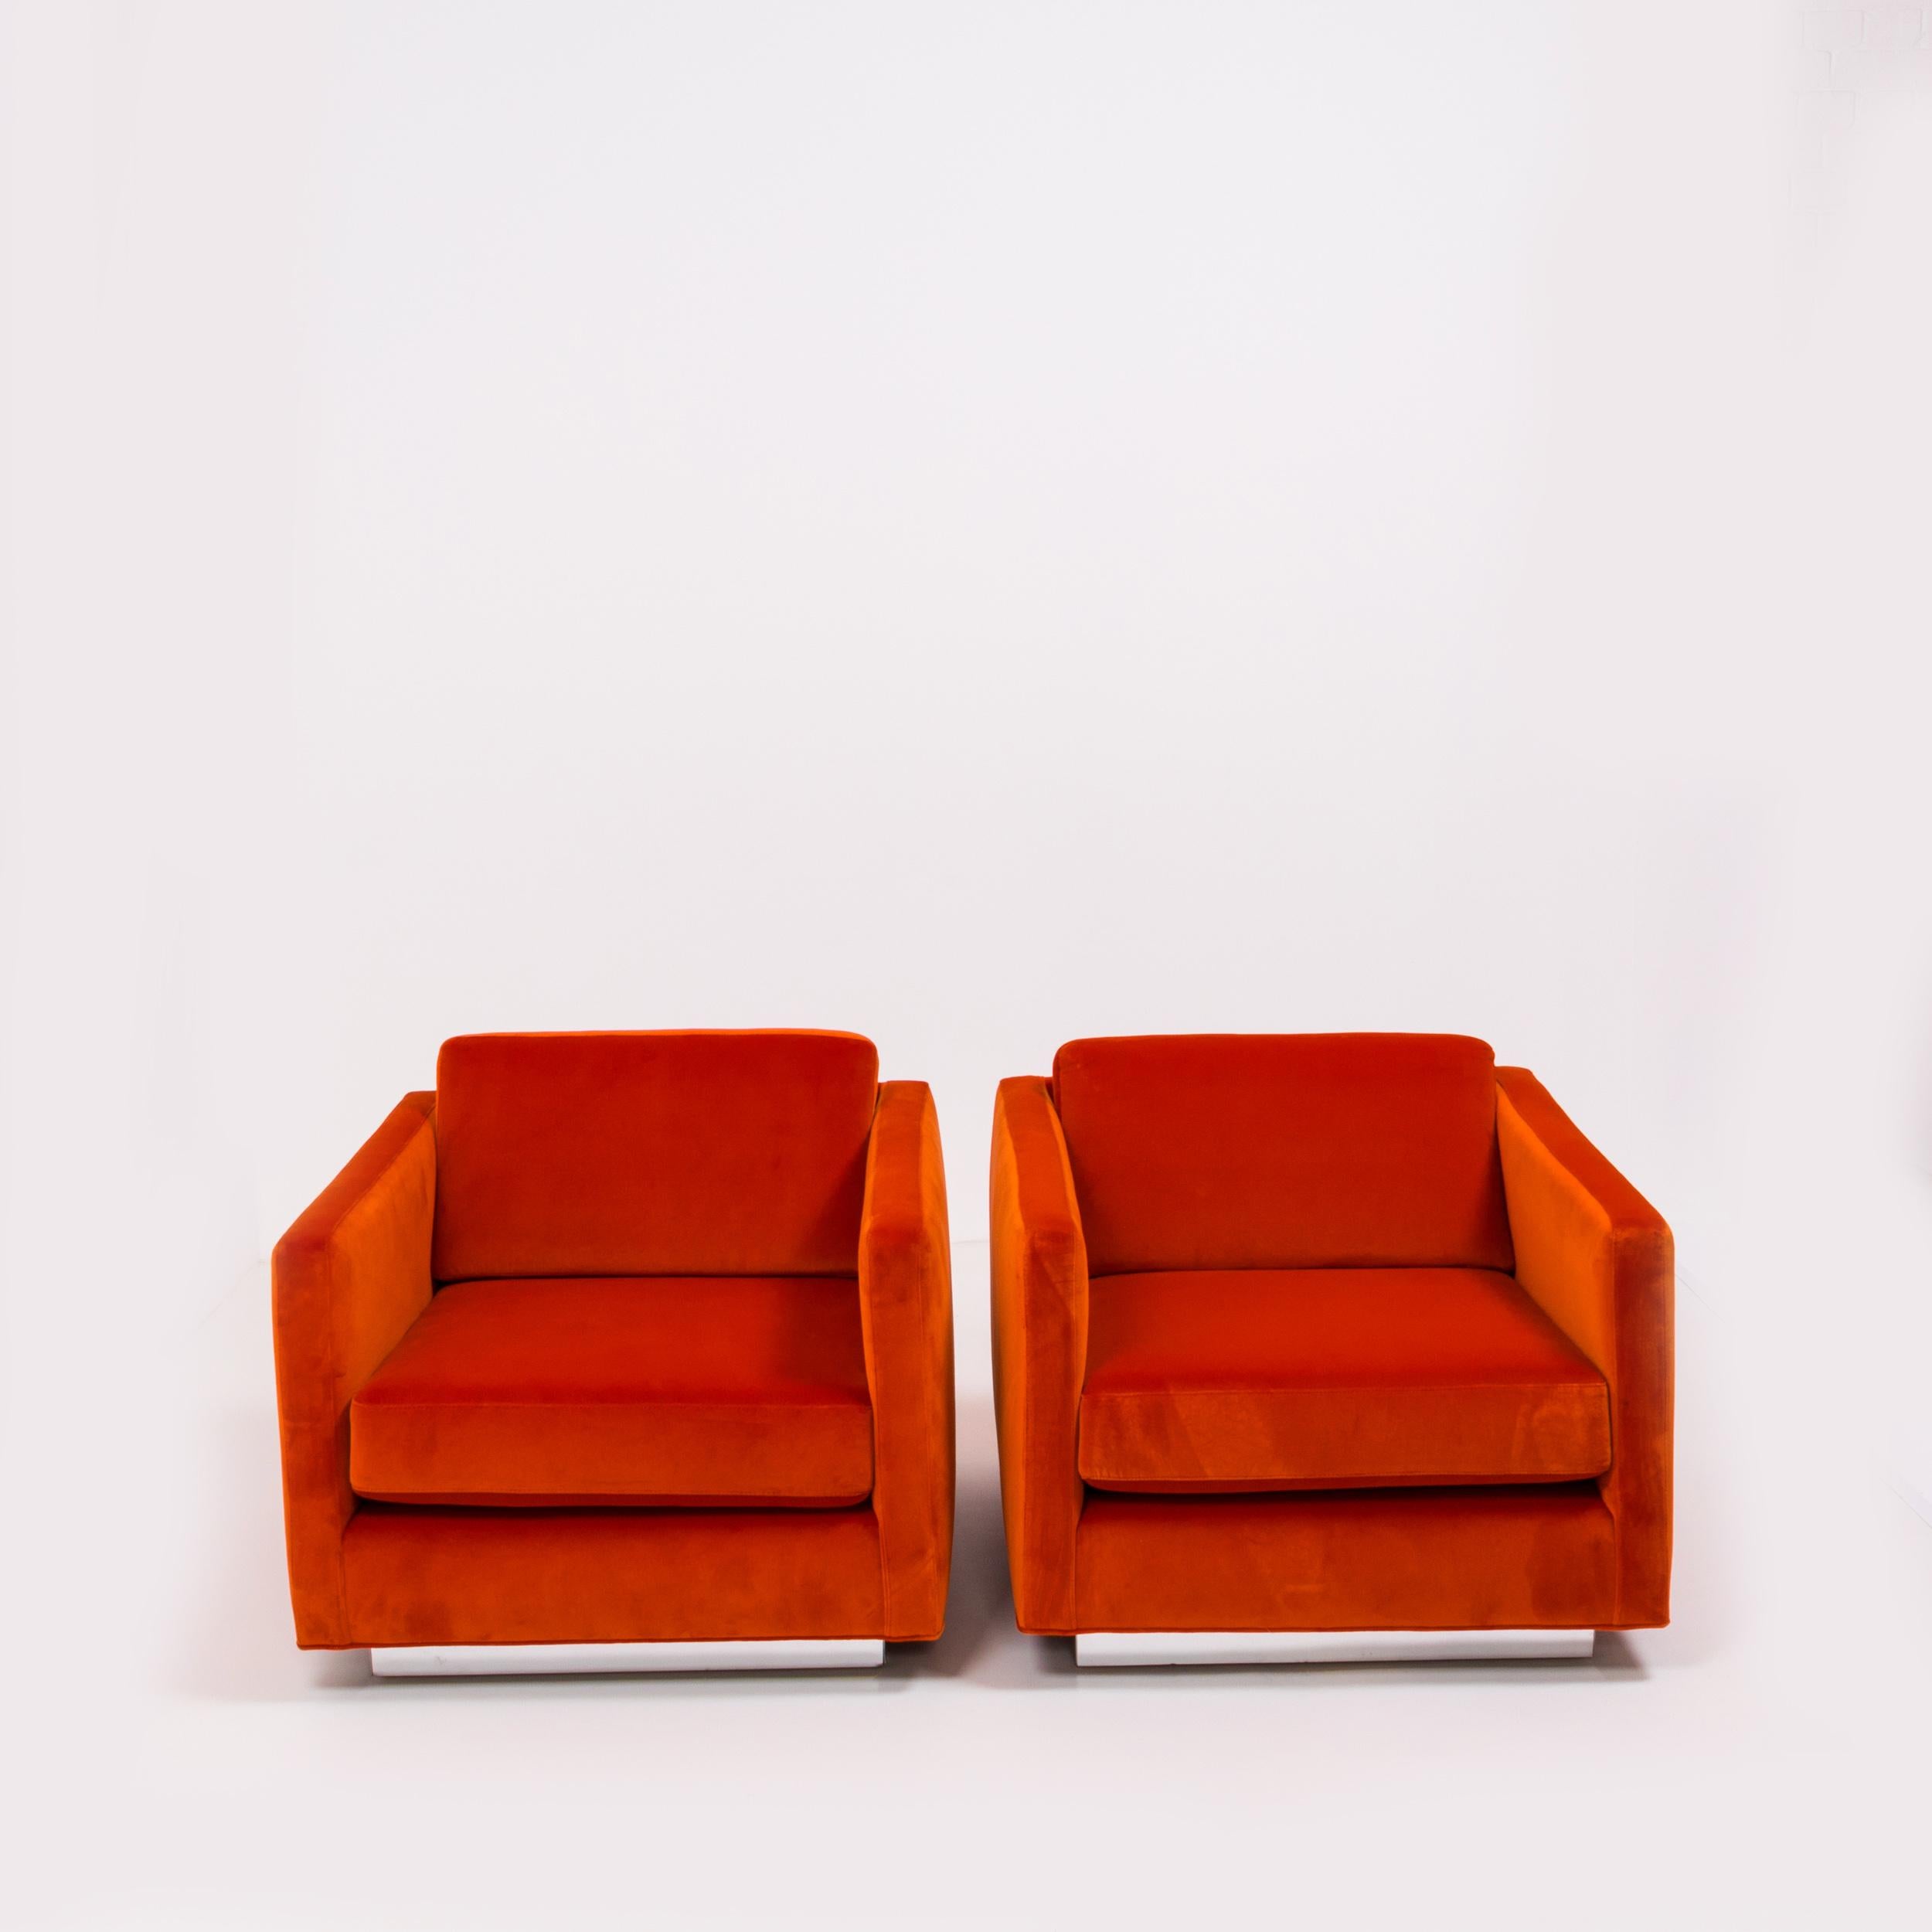 Bright and bold, these exceptional Milo Baughman midcentury cube armchairs combine comfort with a minimalist futuristic aesthetic.

Recently restored, the chairs have been reupholstered in a very vibrant, plush orange velvet and the chrome has